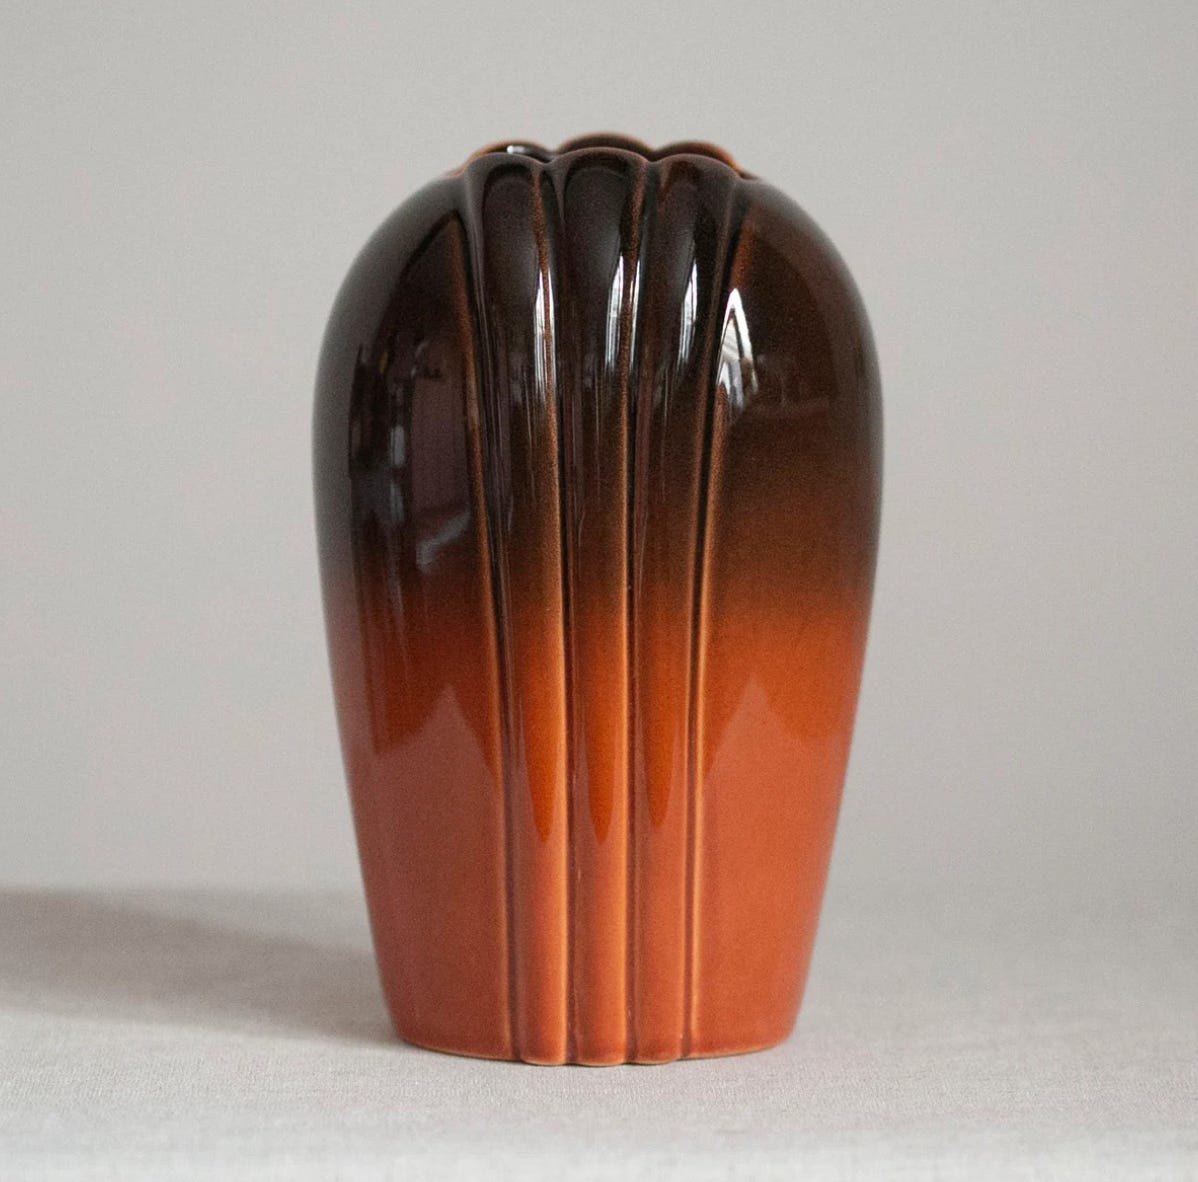 A stunning ceramic vase made to look like a clamshell with three narrow ridges on each side. The glaze grows from a deep chocolate brown at the top to a beautiful burnt orange near the bottom of the vase.